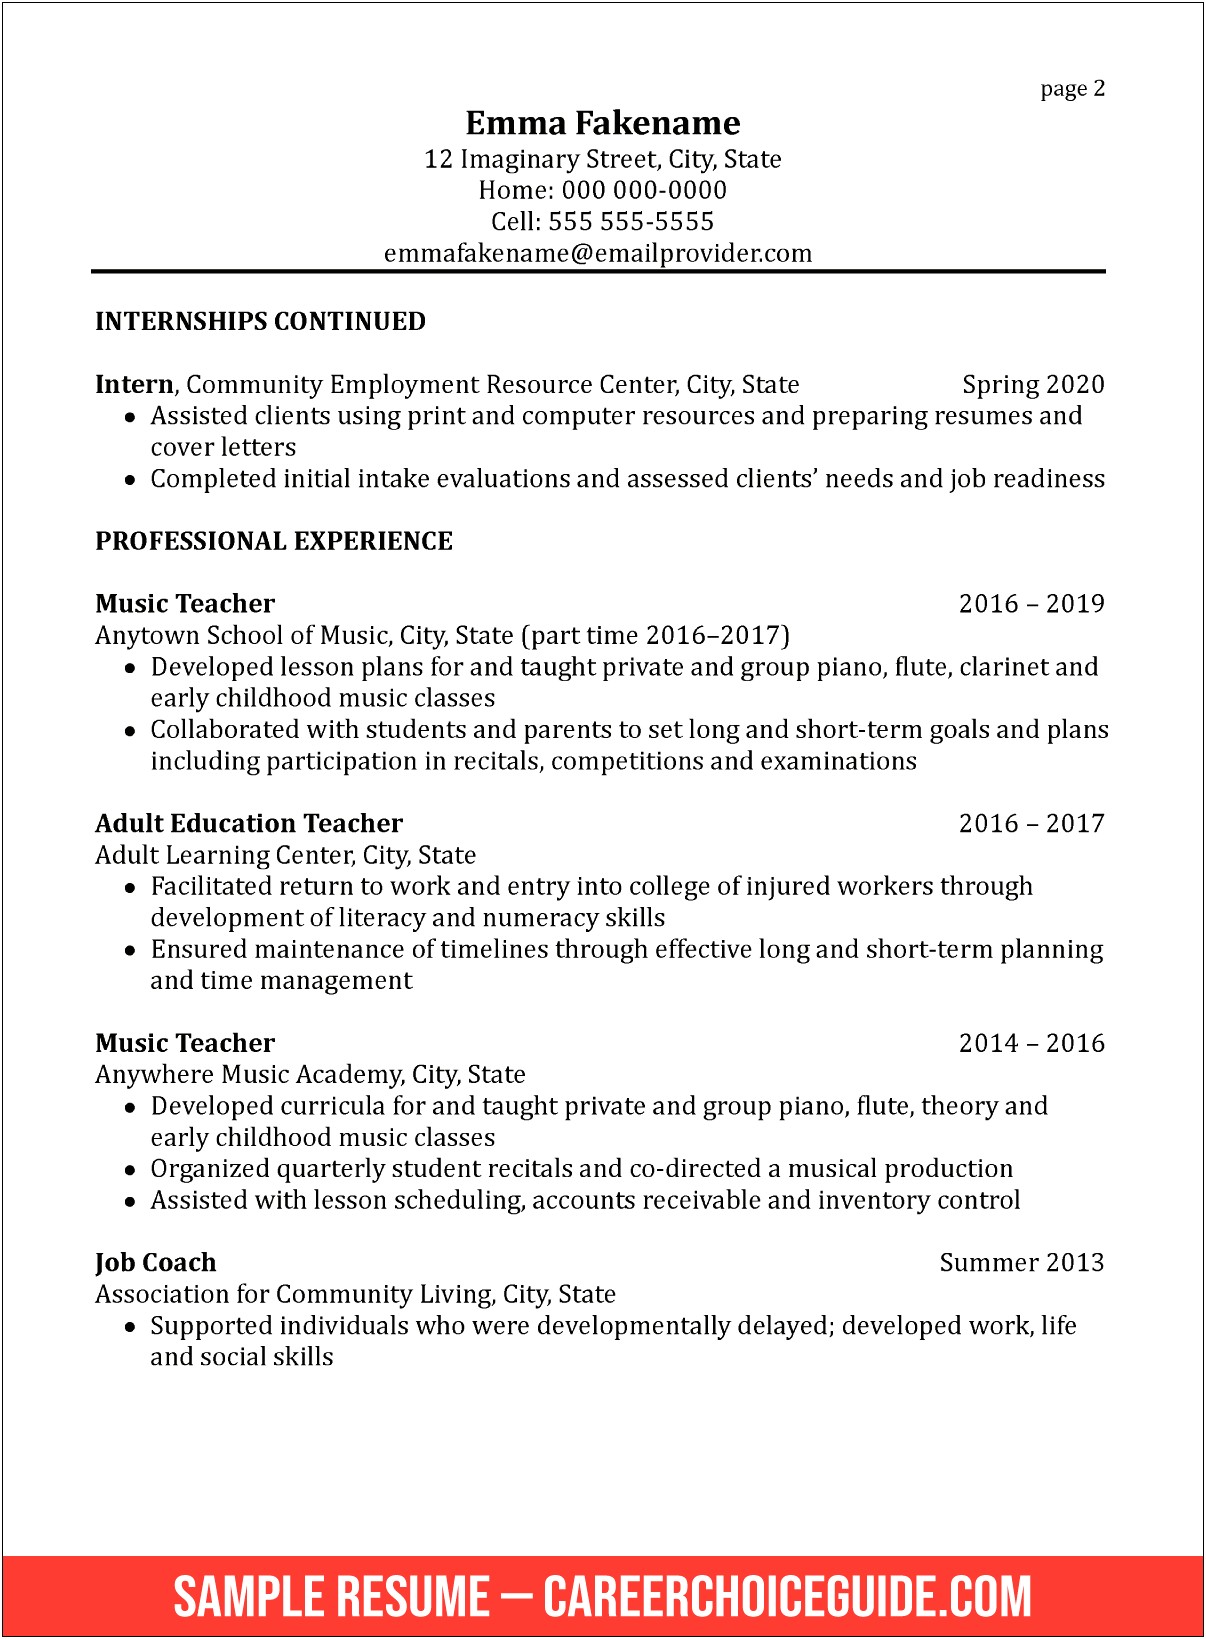 Changing Job Positions In Same School On Resume